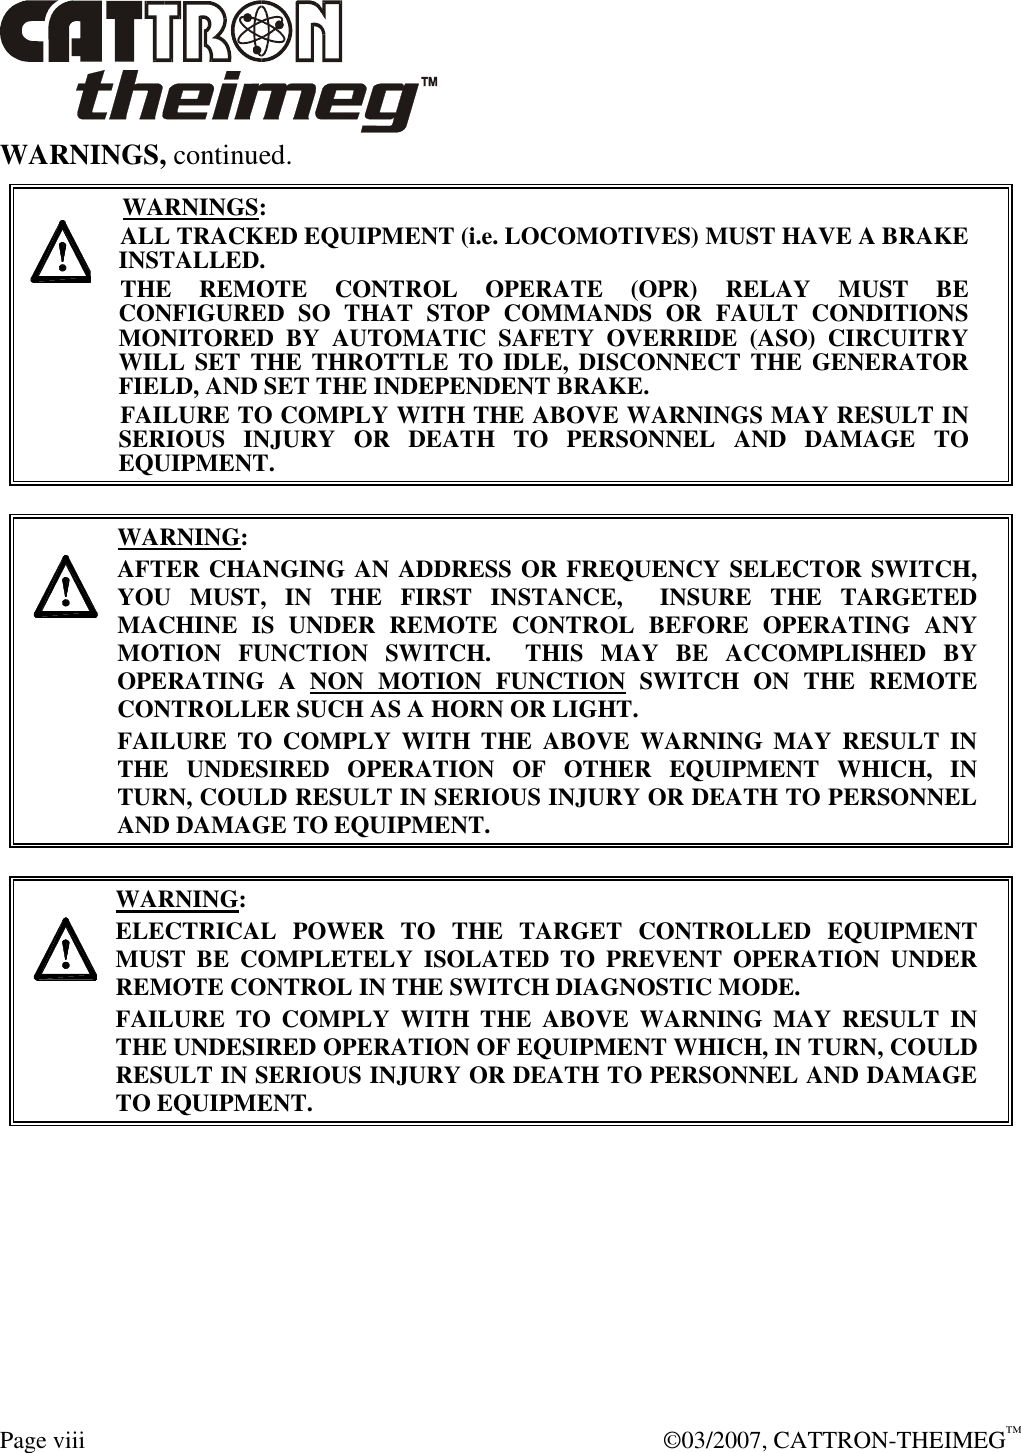  Page viii    ©03/2007, CATTRON-THEIMEG™ WARNINGS, continued.     WARNINGS: ALL TRACKED EQUIPMENT (i.e. LOCOMOTIVES) MUST HAVE A BRAKE INSTALLED. THE  REMOTE  CONTROL  OPERATE  (OPR)  RELAY  MUST  BE CONFIGURED  SO  THAT  STOP  COMMANDS  OR  FAULT  CONDITIONS MONITORED  BY  AUTOMATIC  SAFETY  OVERRIDE  (ASO)  CIRCUITRY WILL SET THE THROTTLE TO IDLE, DISCONNECT  THE  GENERATOR FIELD, AND SET THE INDEPENDENT BRAKE.  FAILURE TO COMPLY WITH THE ABOVE WARNINGS MAY RESULT IN SERIOUS  INJURY  OR  DEATH  TO  PERSONNEL  AND  DAMAGE  TO EQUIPMENT.       WARNING: AFTER CHANGING AN ADDRESS OR FREQUENCY SELECTOR SWITCH, YOU  MUST,  IN  THE  FIRST  INSTANCE,    INSURE  THE  TARGETED MACHINE  IS  UNDER  REMOTE  CONTROL  BEFORE  OPERATING  ANY MOTION  FUNCTION  SWITCH.    THIS  MAY  BE  ACCOMPLISHED  BY OPERATING  A  NON  MOTION  FUNCTION  SWITCH  ON  THE  REMOTE CONTROLLER SUCH AS A HORN OR LIGHT.  FAILURE  TO  COMPLY  WITH  THE  ABOVE  WARNING  MAY  RESULT  IN THE  UNDESIRED  OPERATION  OF  OTHER  EQUIPMENT  WHICH,  IN TURN, COULD RESULT IN SERIOUS INJURY OR DEATH TO PERSONNEL AND DAMAGE TO EQUIPMENT.       WARNING: ELECTRICAL  POWER  TO  THE  TARGET  CONTROLLED  EQUIPMENT MUST  BE  COMPLETELY  ISOLATED  TO  PREVENT  OPERATION  UNDER REMOTE CONTROL IN THE SWITCH DIAGNOSTIC MODE.  FAILURE  TO  COMPLY  WITH  THE  ABOVE  WARNING  MAY  RESULT  IN THE UNDESIRED OPERATION OF EQUIPMENT WHICH, IN TURN, COULD RESULT IN SERIOUS INJURY OR DEATH TO PERSONNEL AND DAMAGE TO EQUIPMENT.   